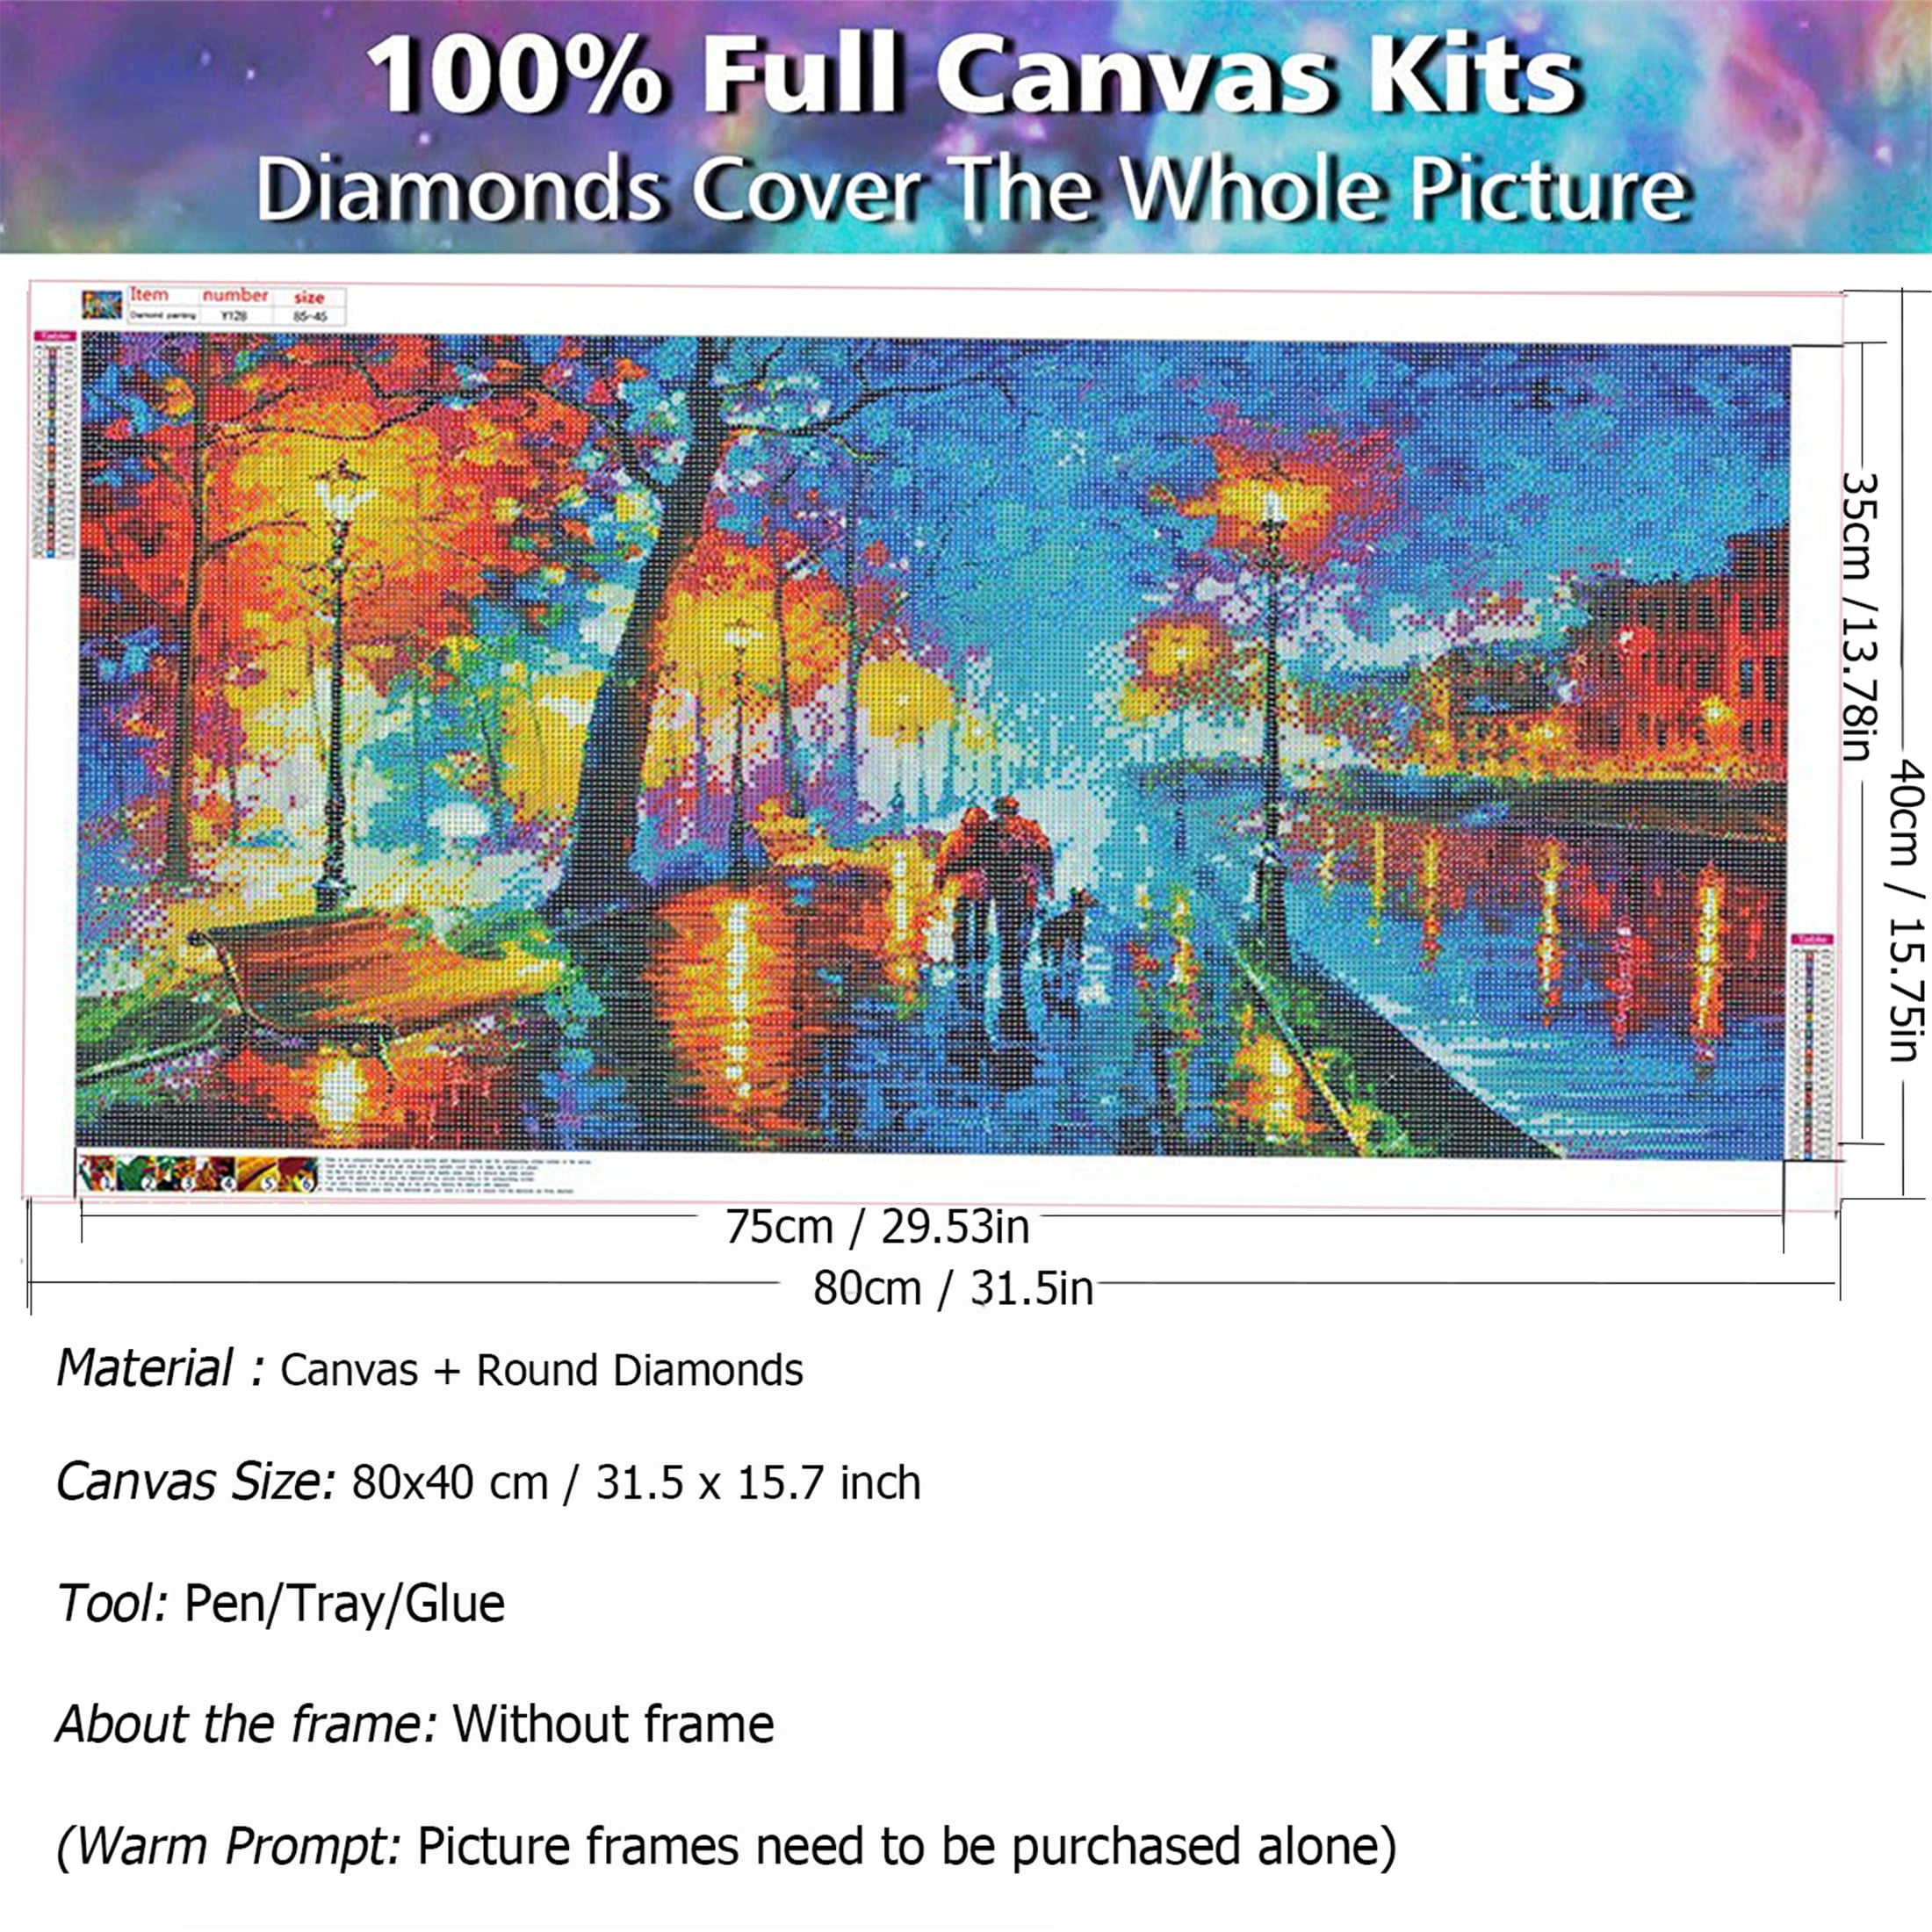 YALKIN Large Paint by Number for Adults Canvas 15.8 x 35.5 Large, Dandelion